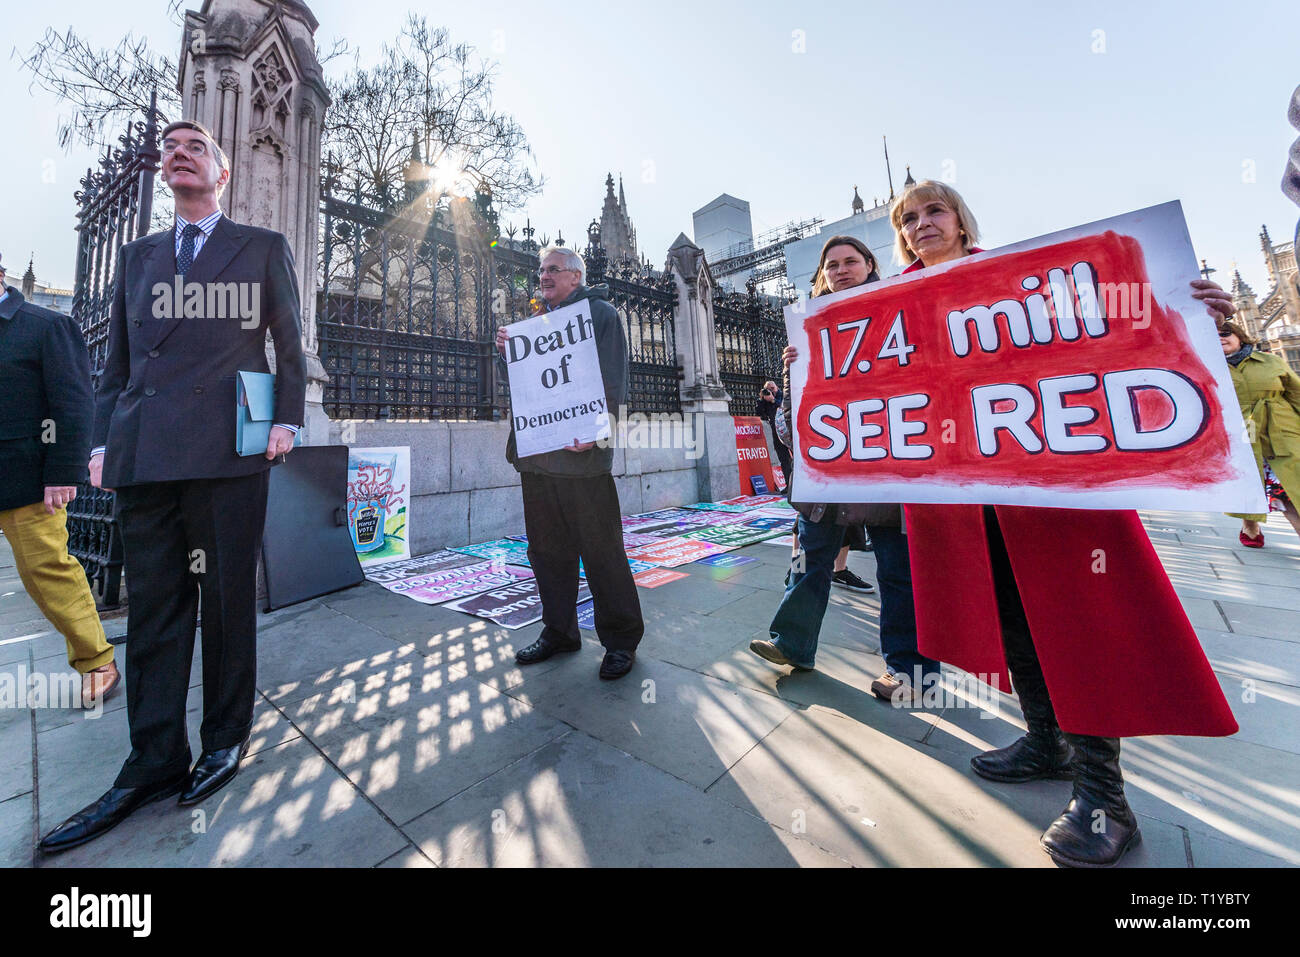 Conservative MP Jacob Rees-Mogg arriving at the Palace of Westminster, London, UK. 29th March 2019, the date that should have seen the UK leave the EU, for the debate on a government Brexit motion towards approving a withdrawal agreement. Protesters are beginning to gather outside Stock Photo